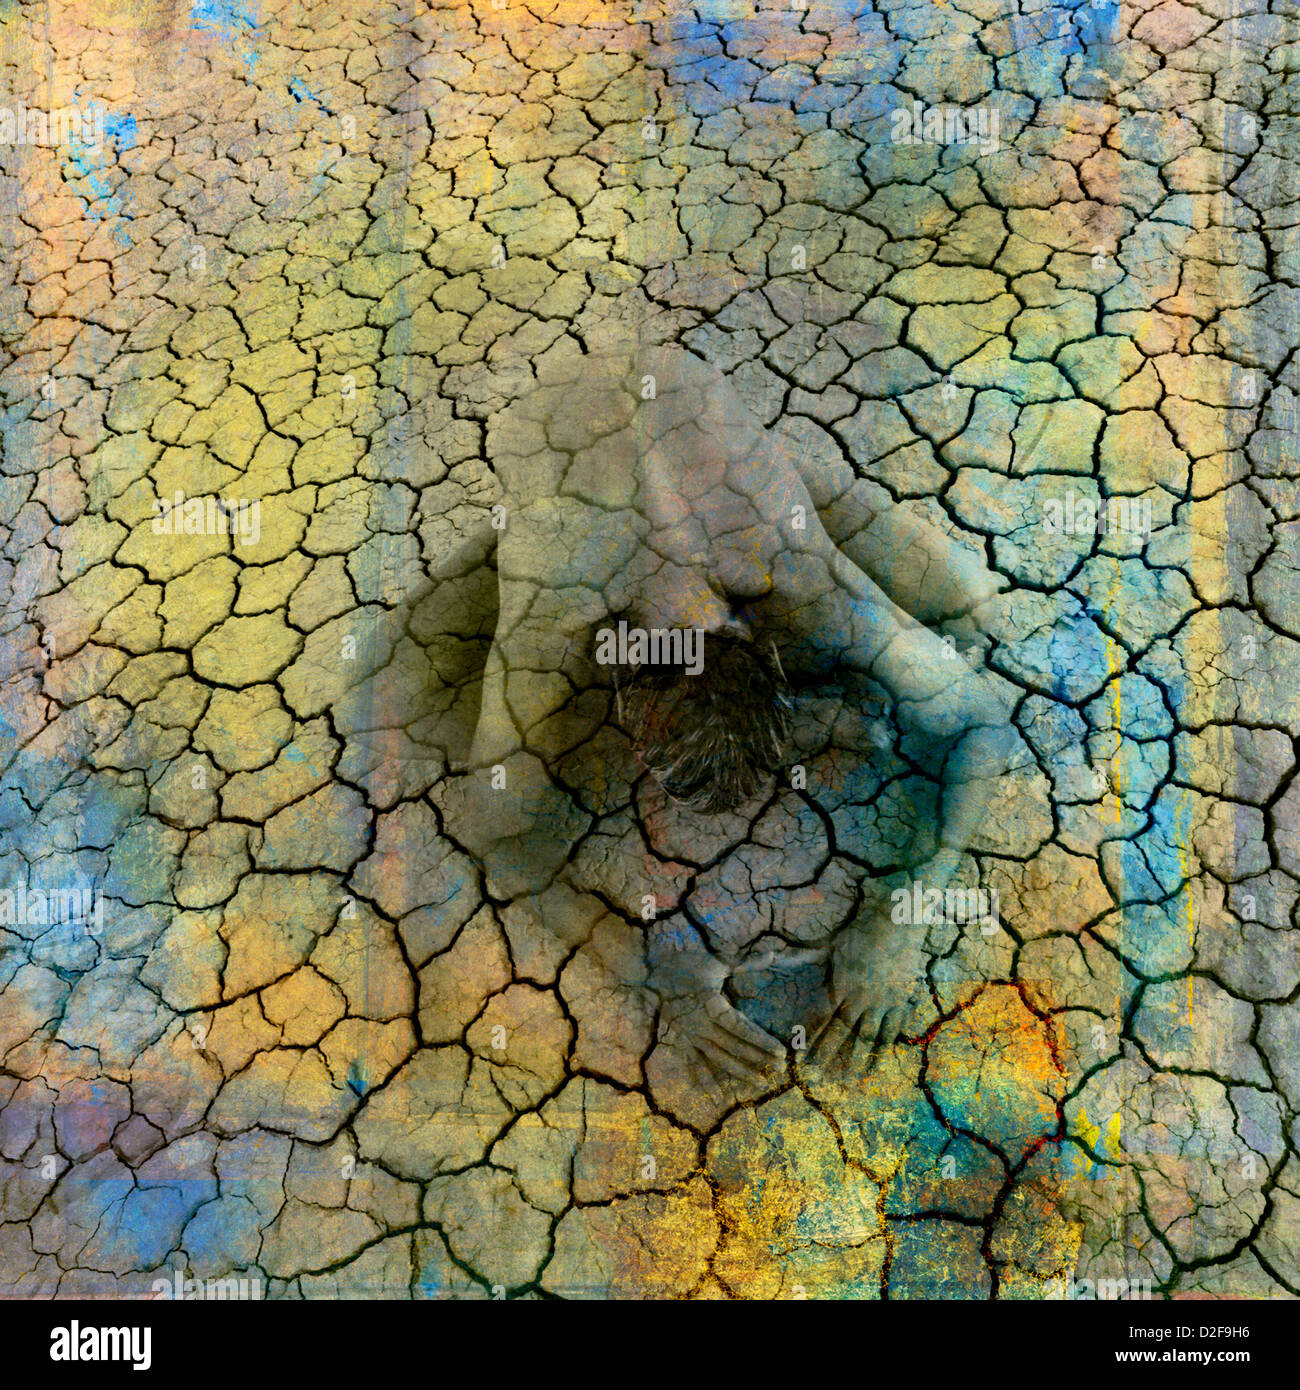 Female figure being in cracked earth. Photo based illustration. Stock Photo